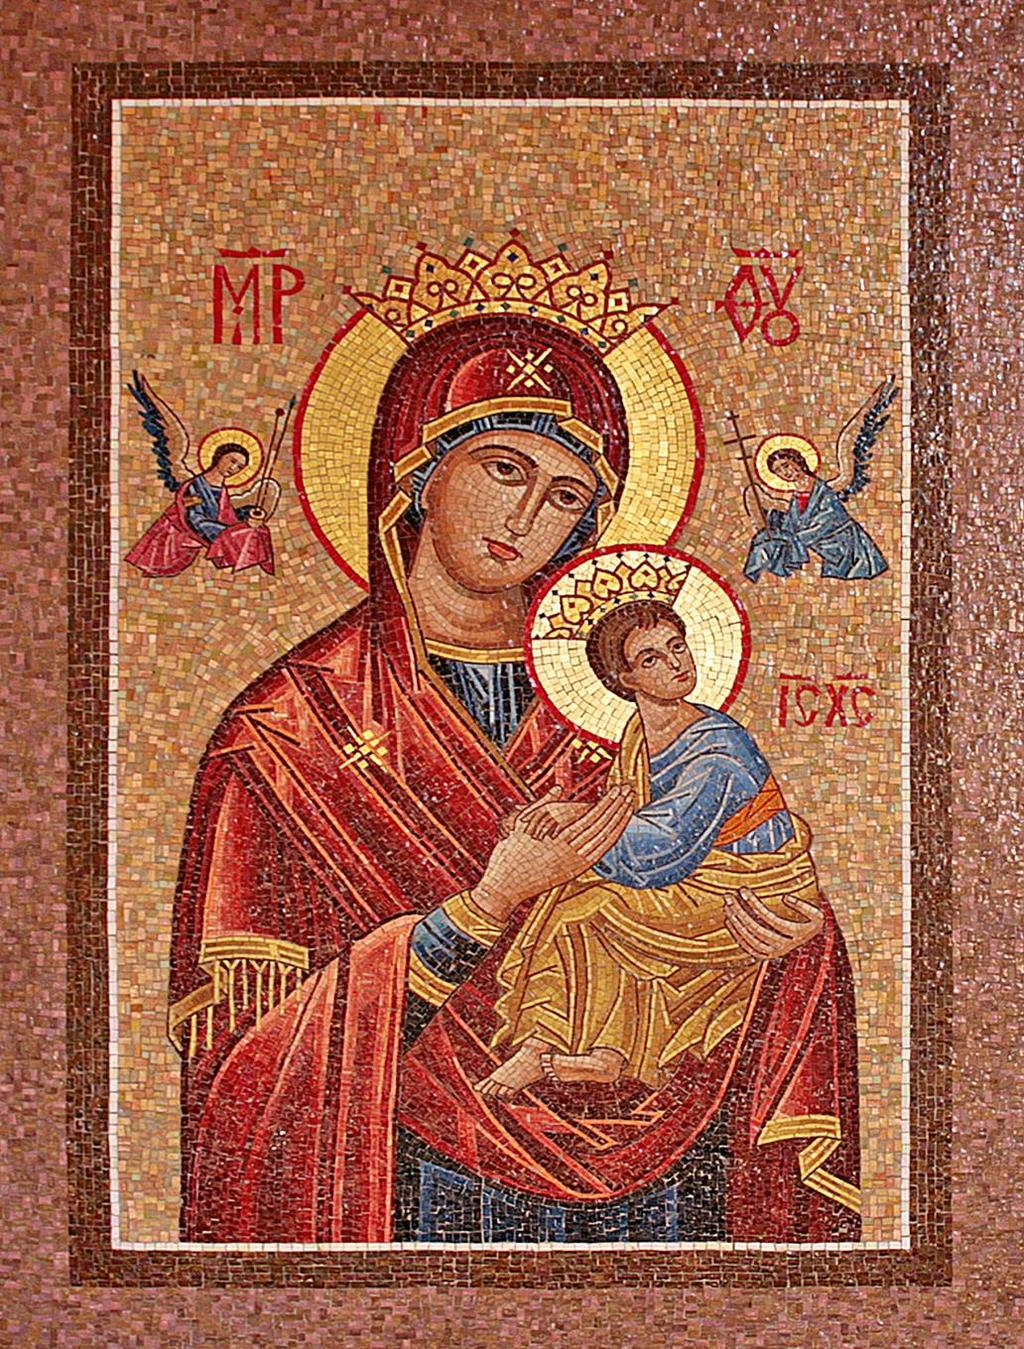 THE VIRGIN OF THE PASSION This icon is known as The Virgin of the Passion, or Our Lady of Perpetual Help.